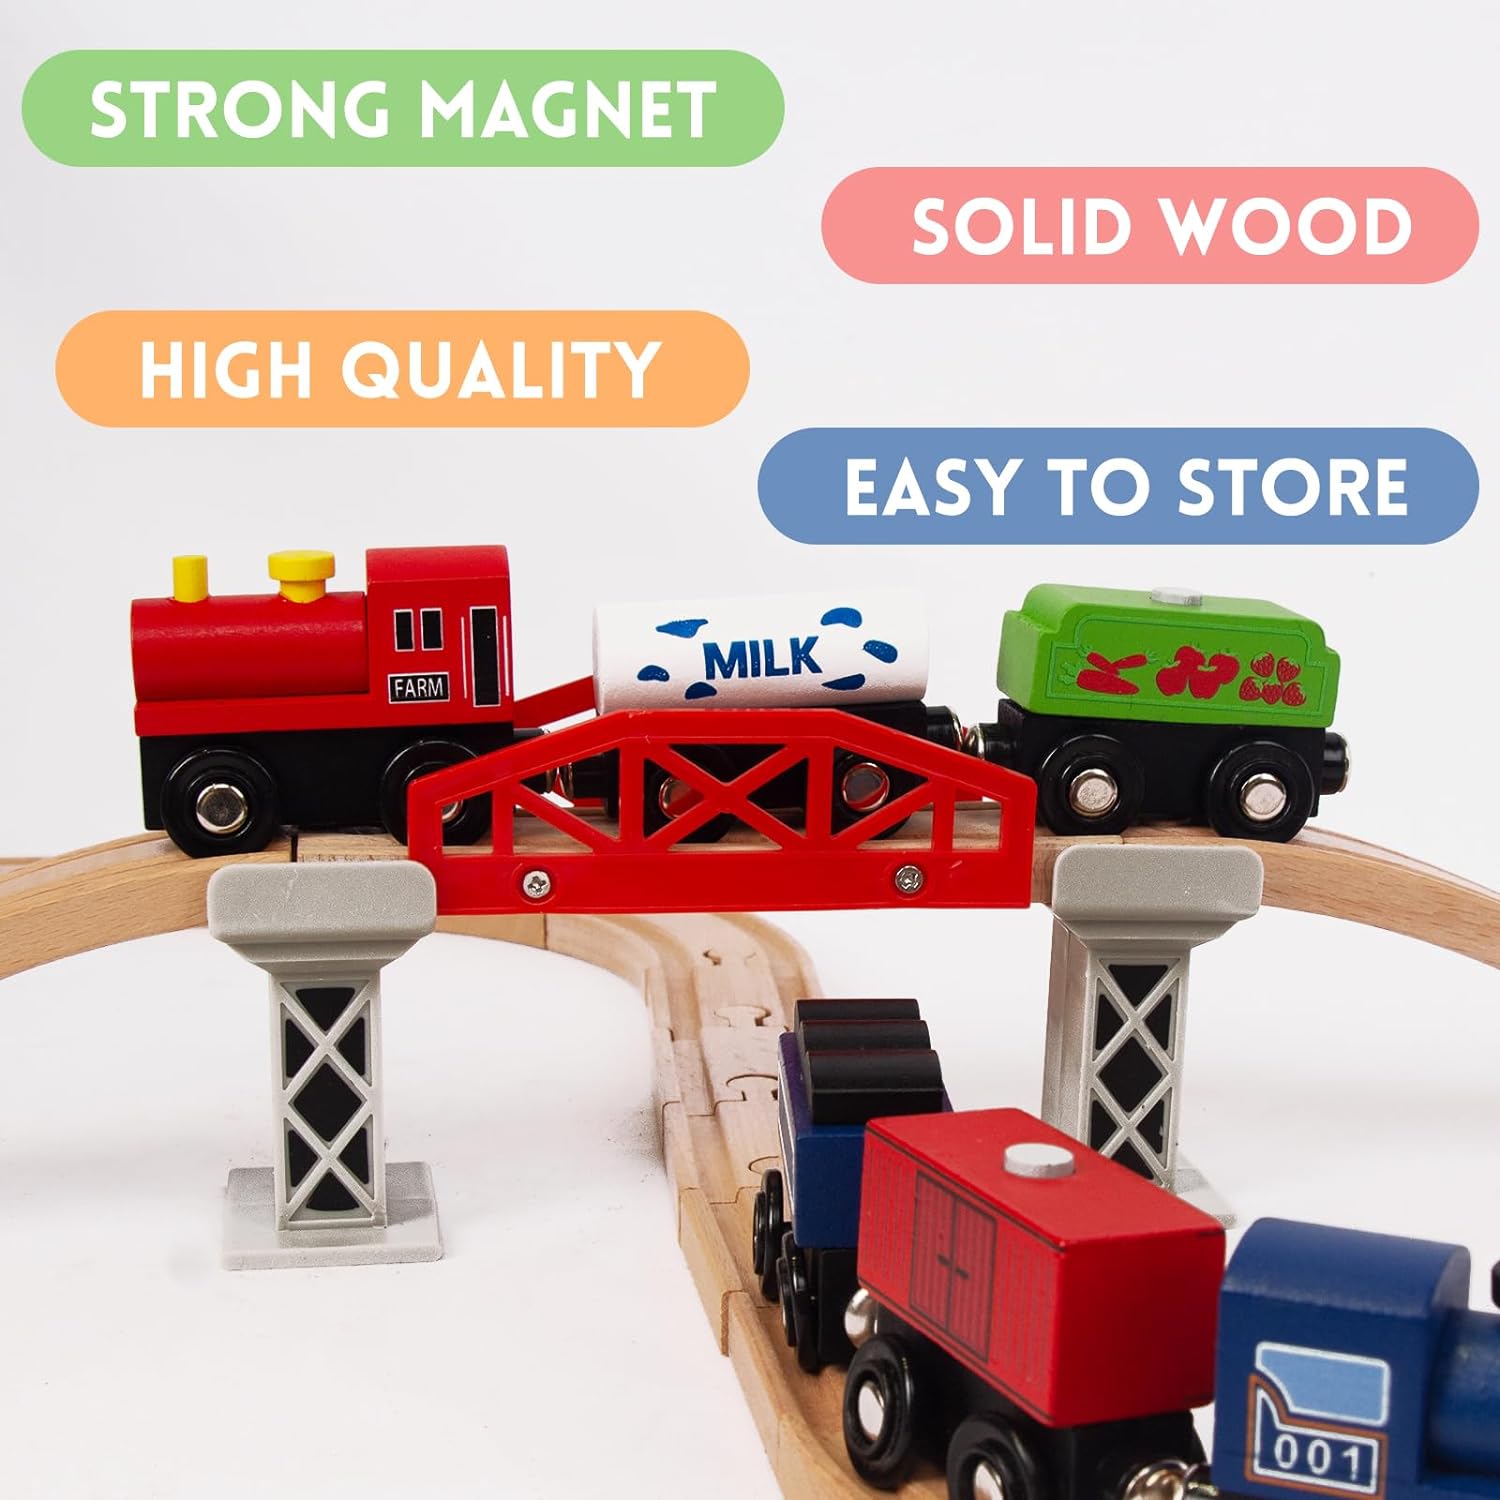 WoodenEdu Wooden Train Sets for Toddlers, 9 Pcs Train Toy Magnetic Sets Fits Brio, Thomas, Melissa and Doug, Kids for Boys Girls 3 4 5 Years Old - Cykapu